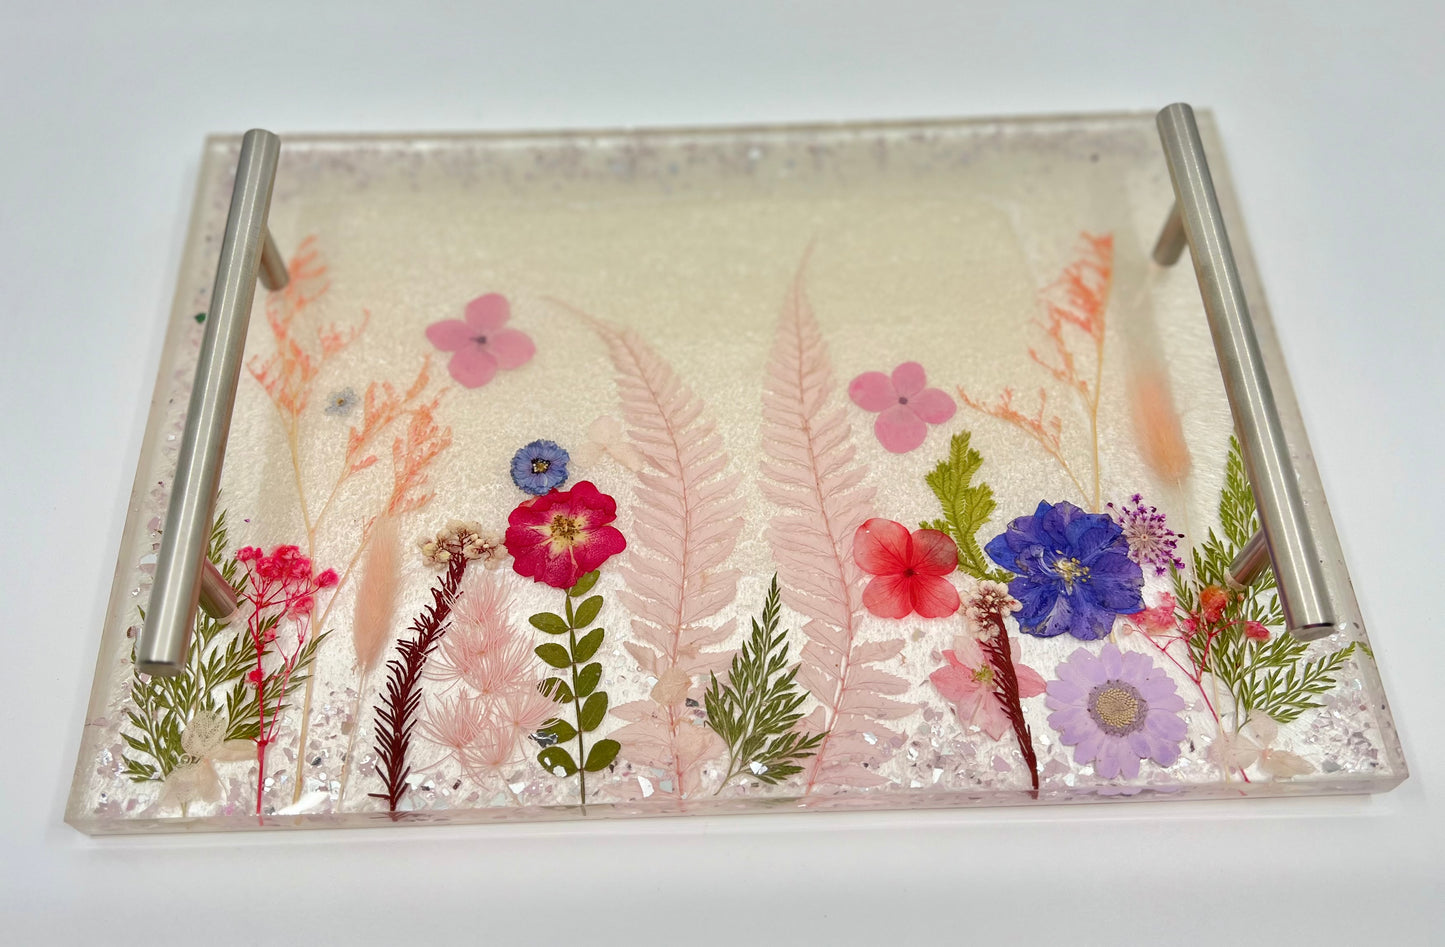 Resin Decorative Tray with Pressed Flowers and Silver Handles